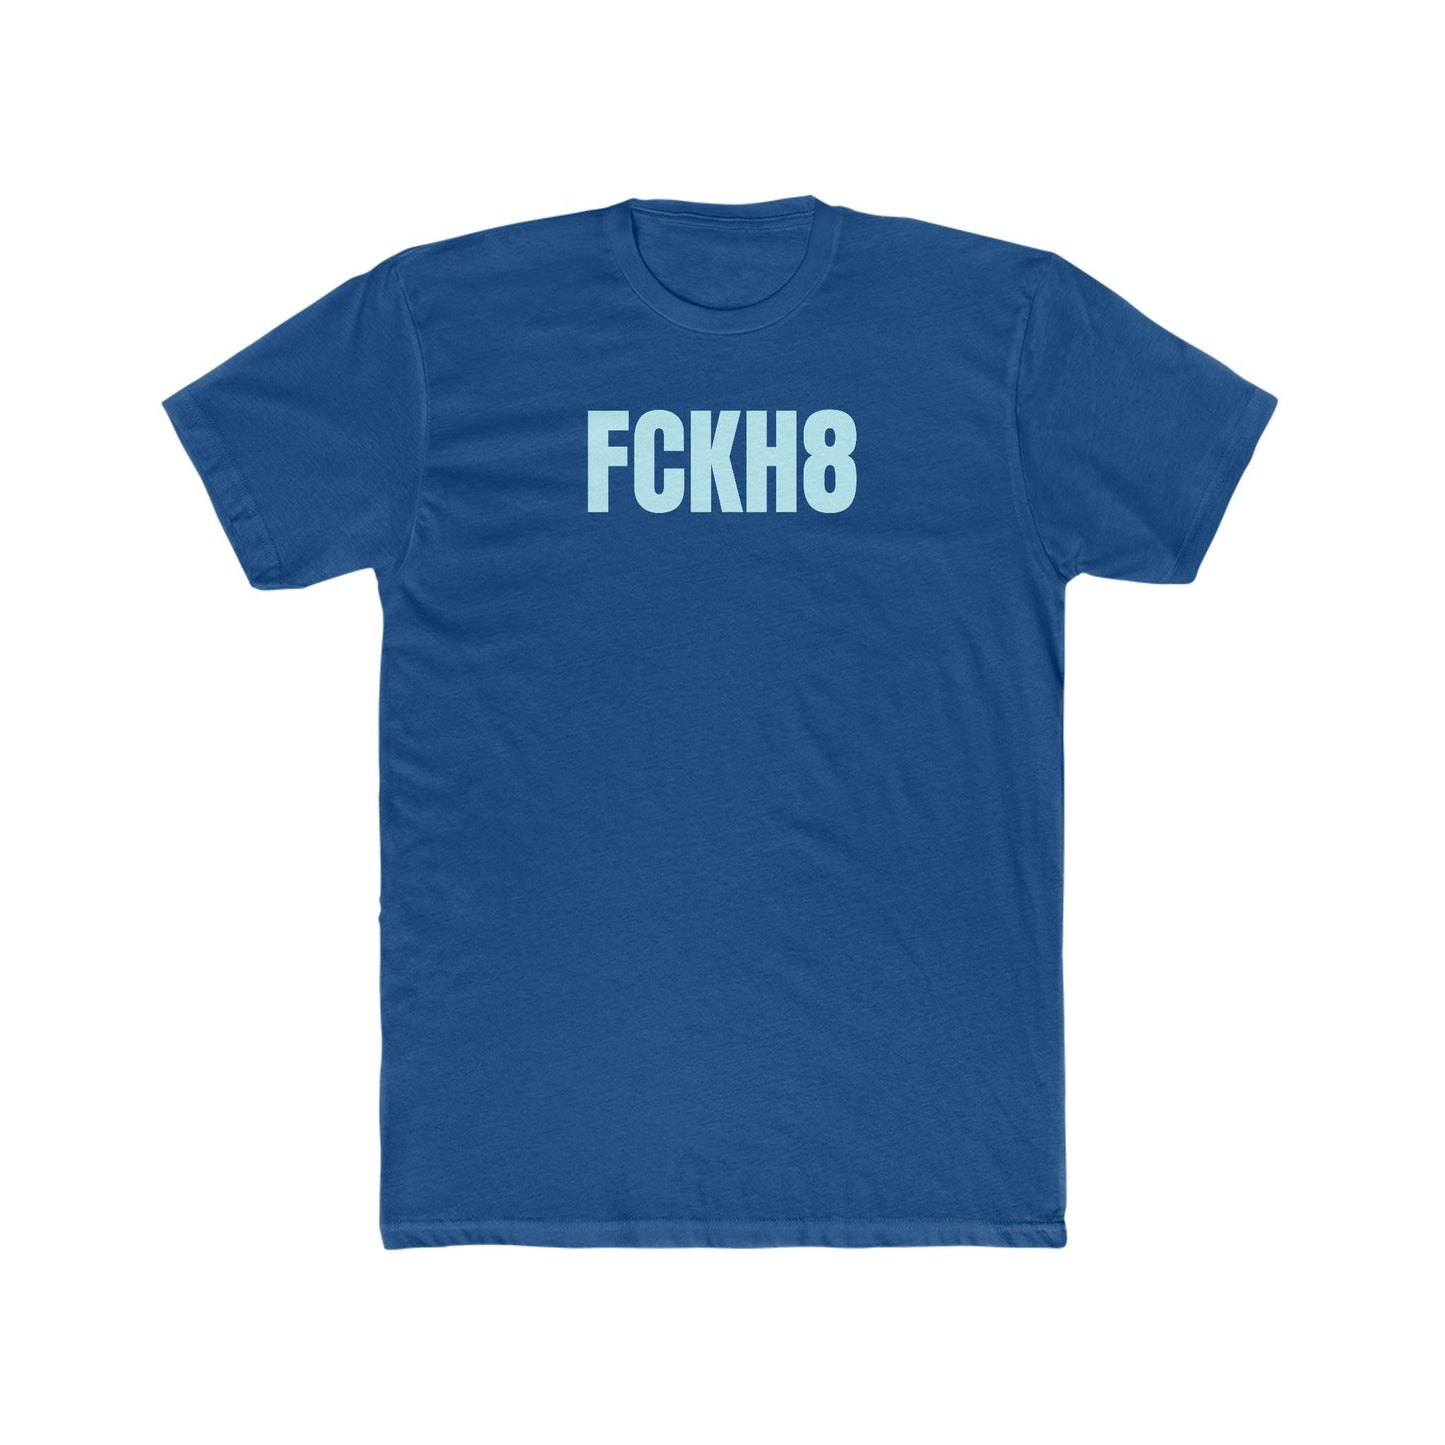 FCKH8 (Fuck Hate) Cotton Crew Tee - Wicked Naughty Apparel